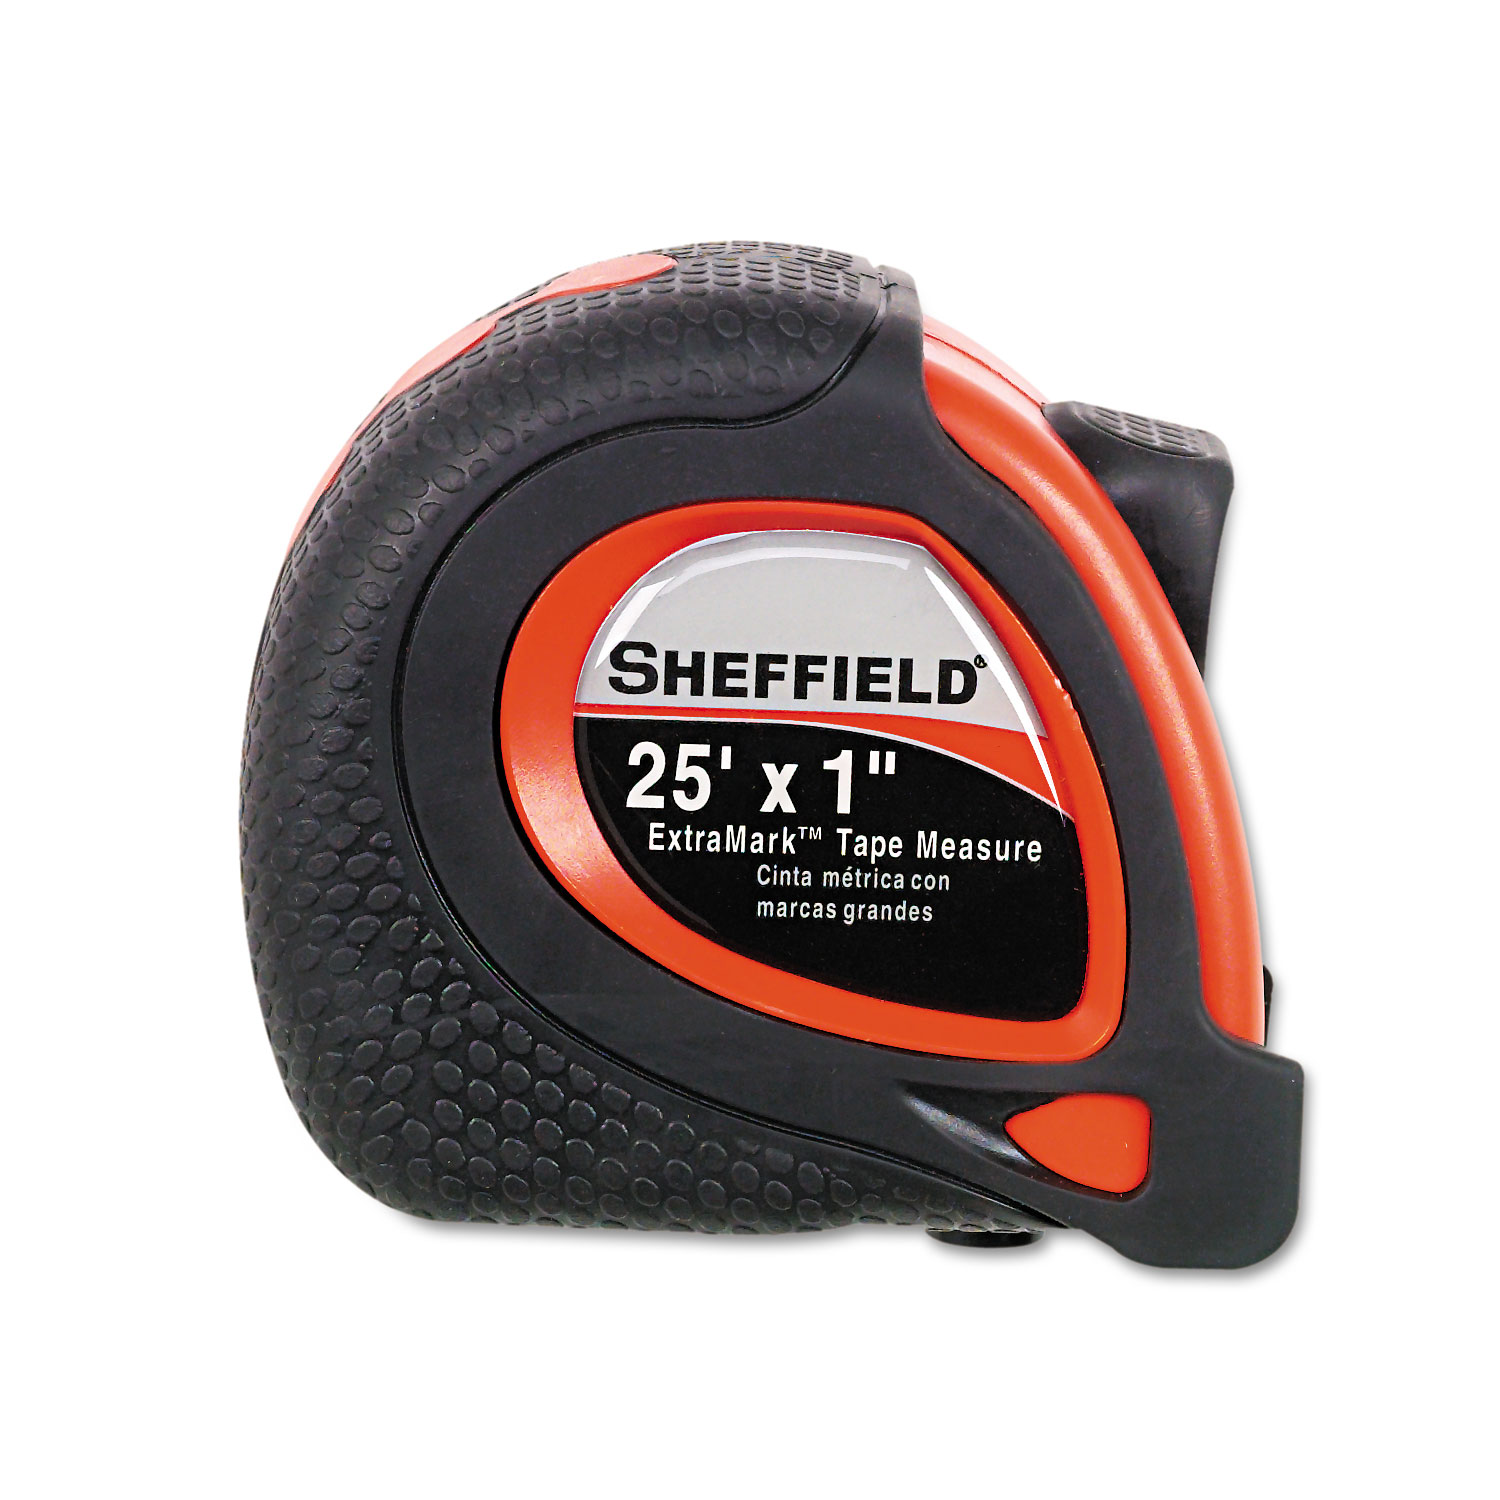 Sheffield ExtraMark Tape Measure, Red with Black Rubber Grip, 1